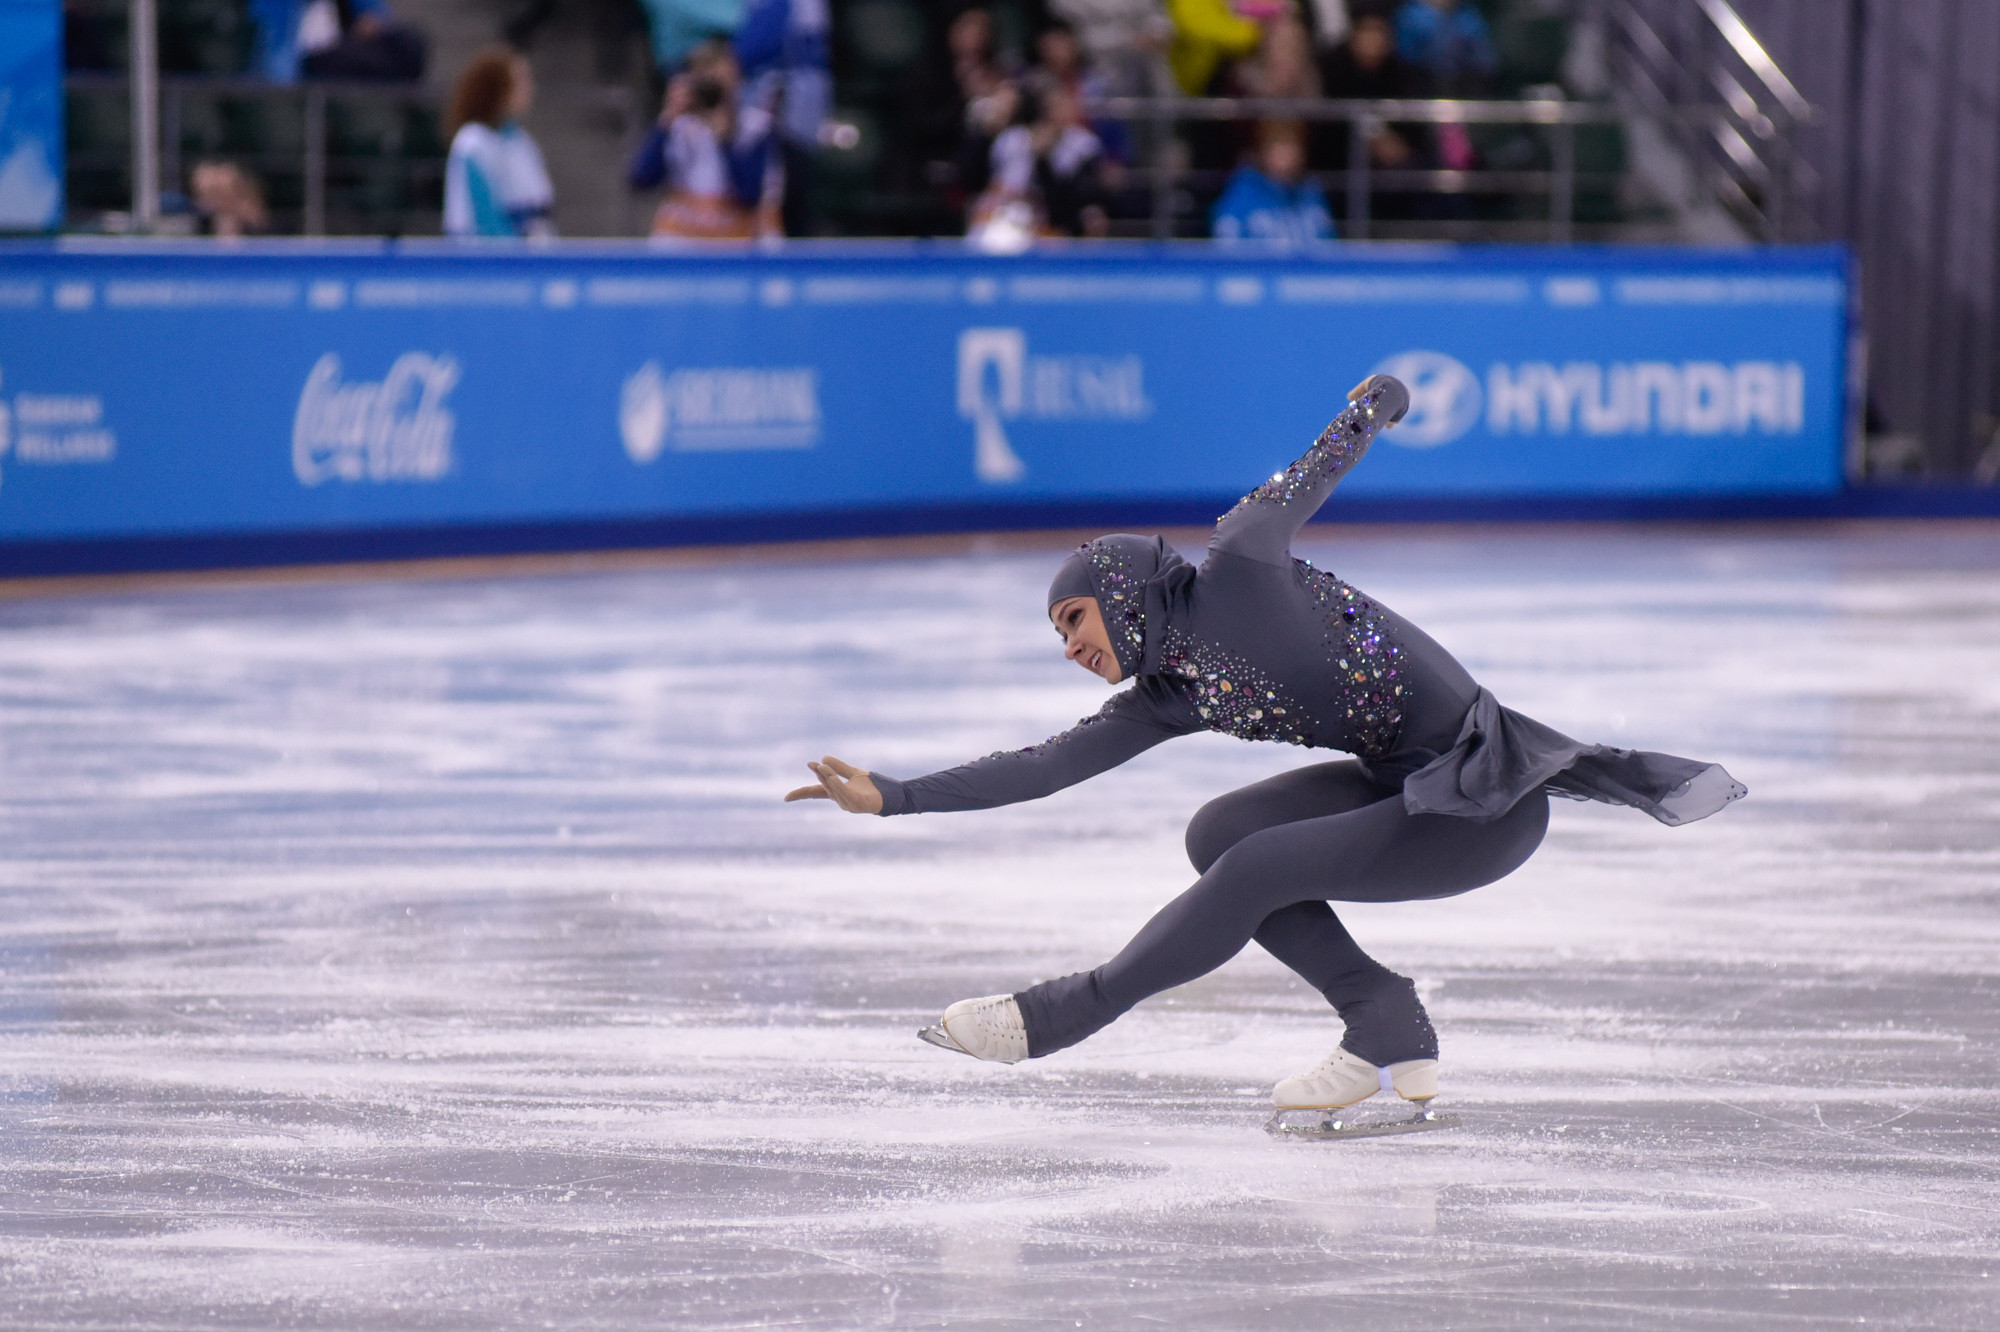 Zahra Lari of the United Arab Emirates, the first figure skater to compete in a hijab, did not score highly enough to participate in tomorrow's event ©Krasnoyarsk 2019